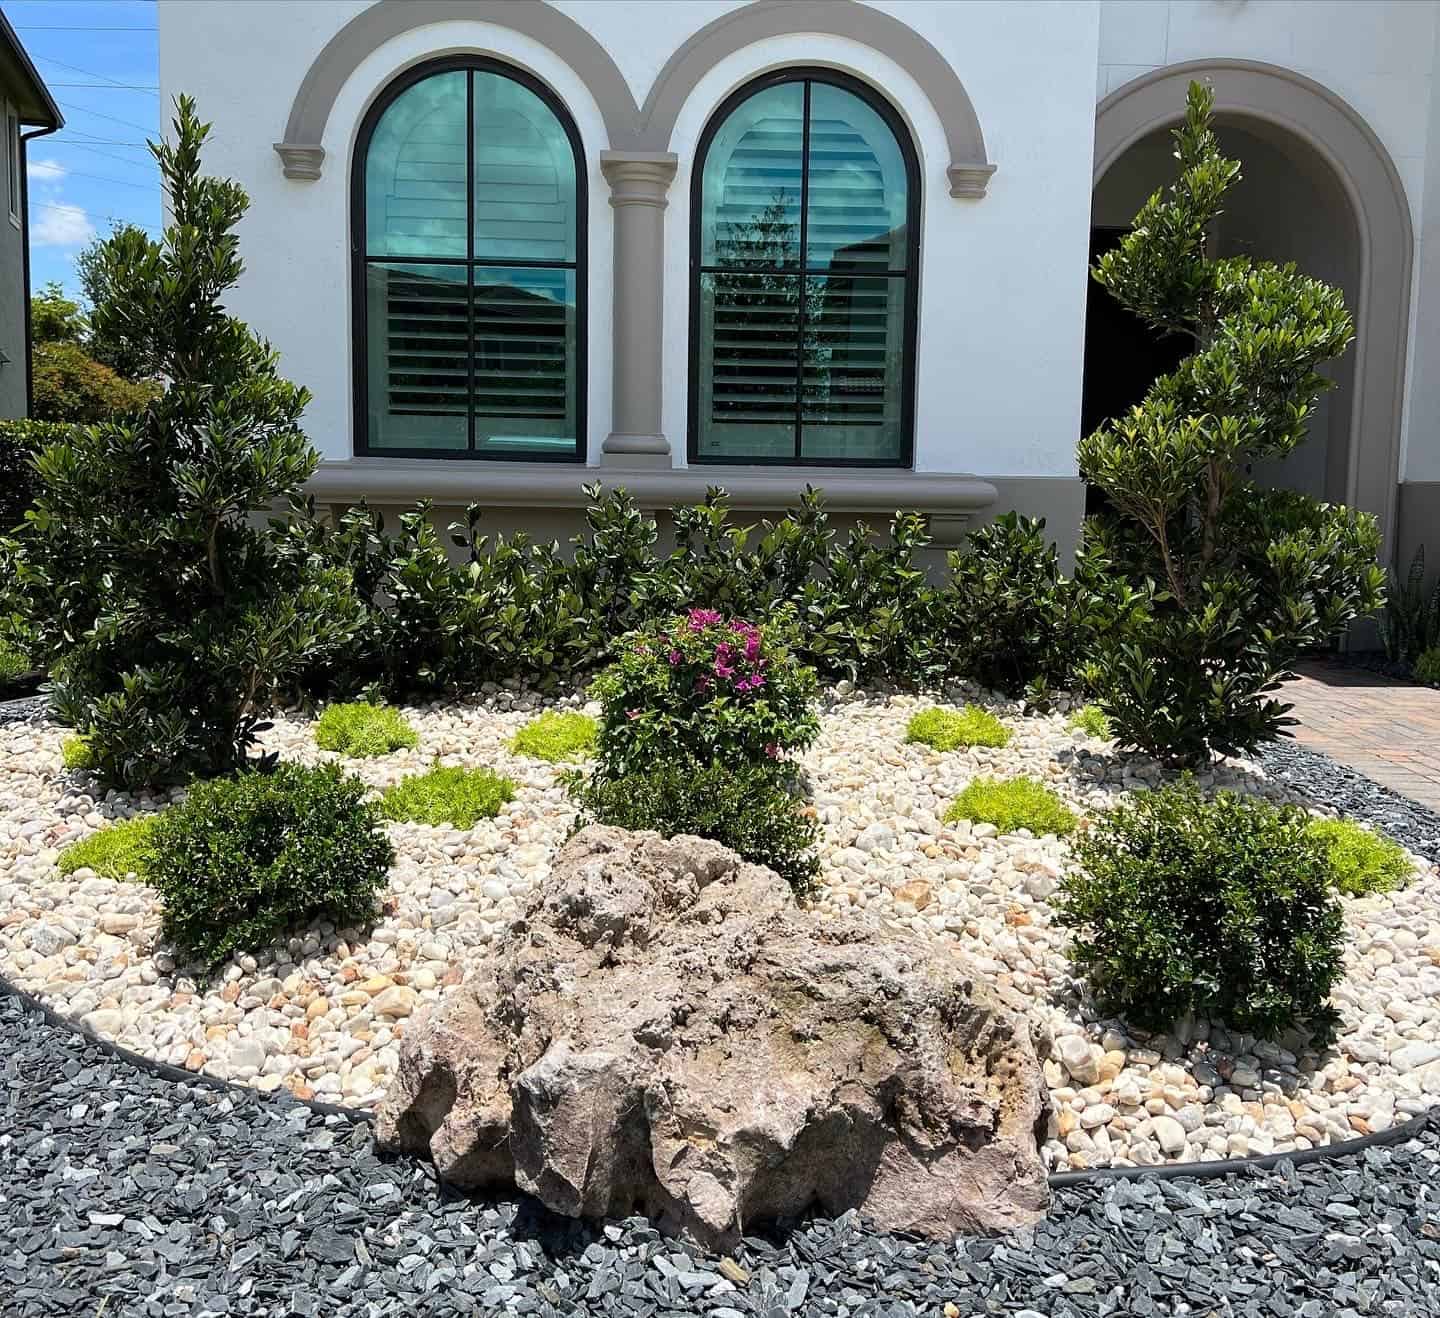 Discover how to elevate your property's worth through professional landscaping. Pristine Landscapes offers tailored designs and impeccable installations to boost curb appeal and maximize value.